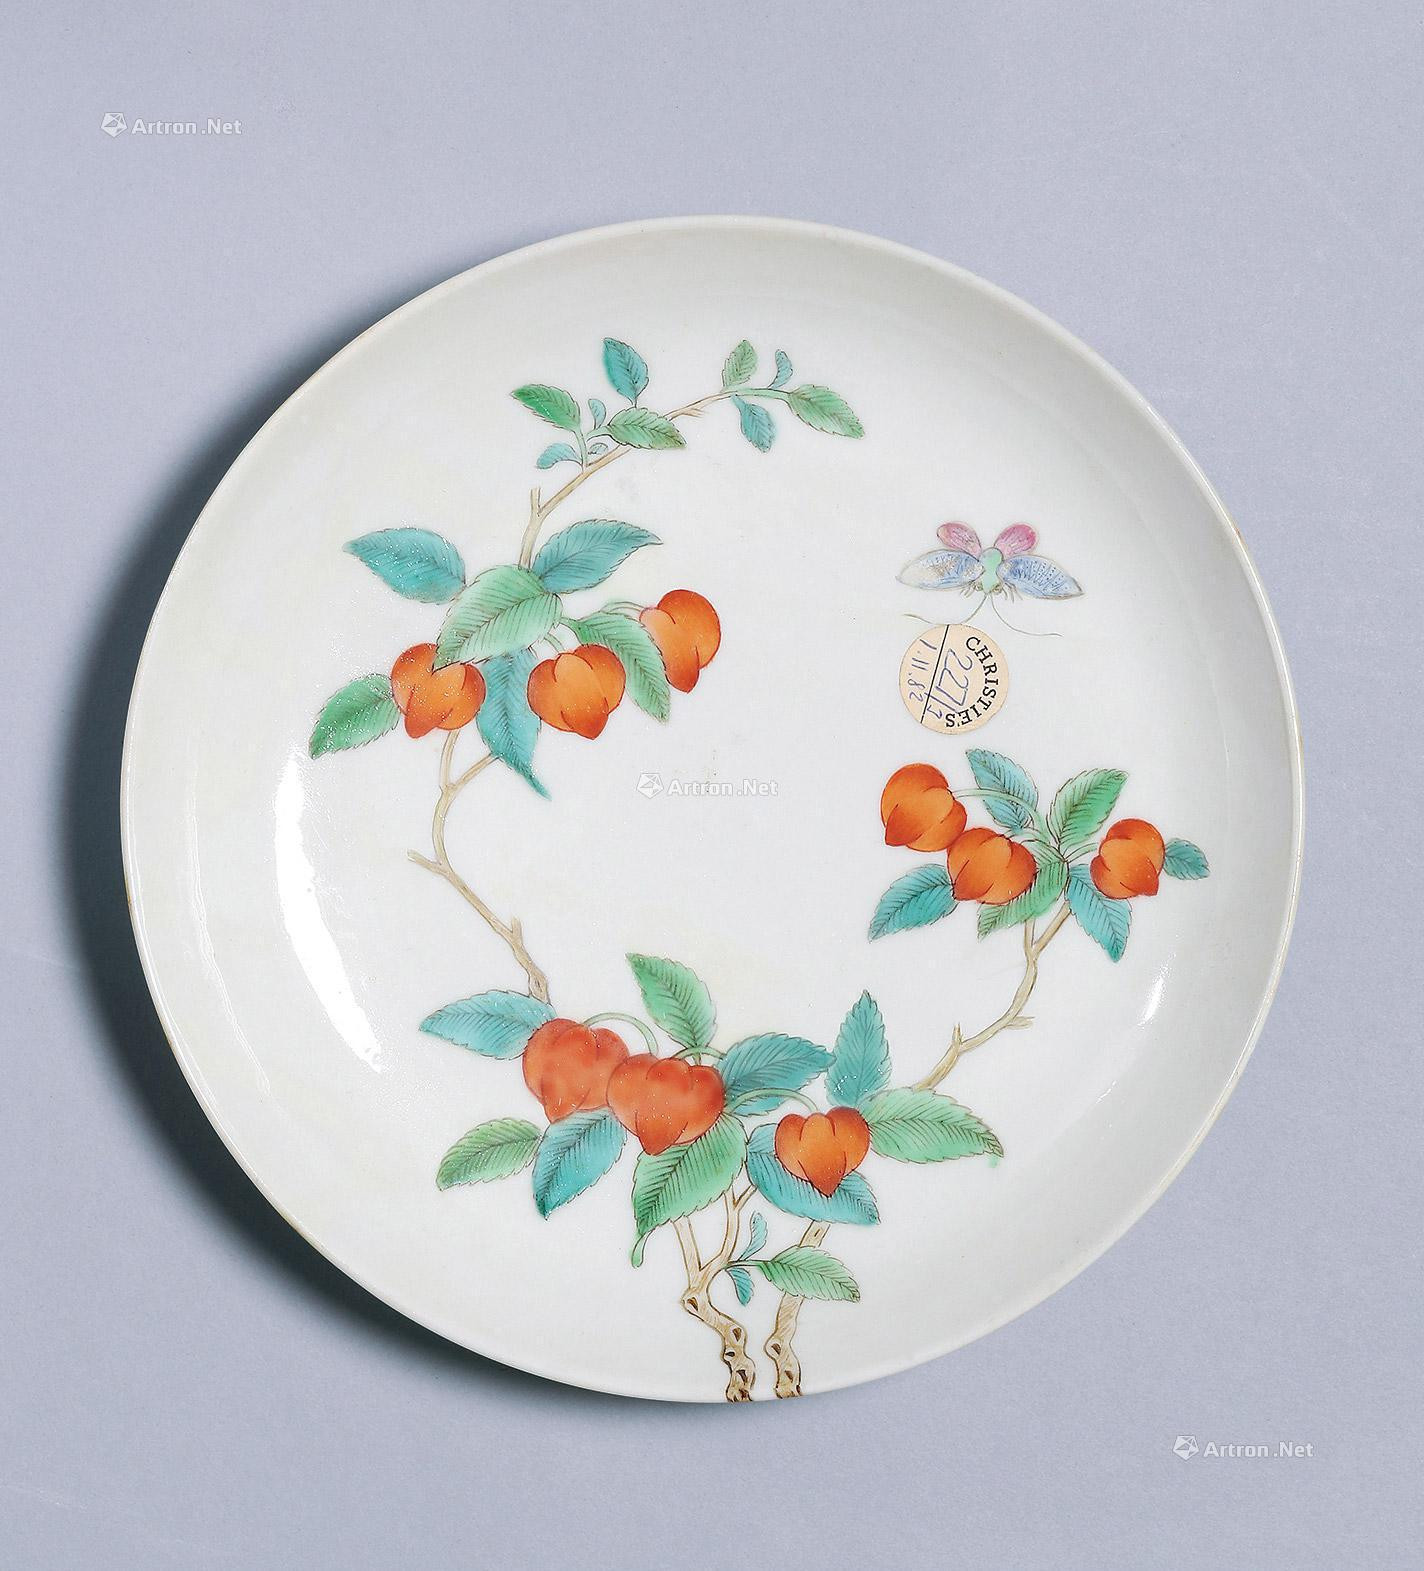 A FAMILLE-ROSE BUTTERFLY PLATE